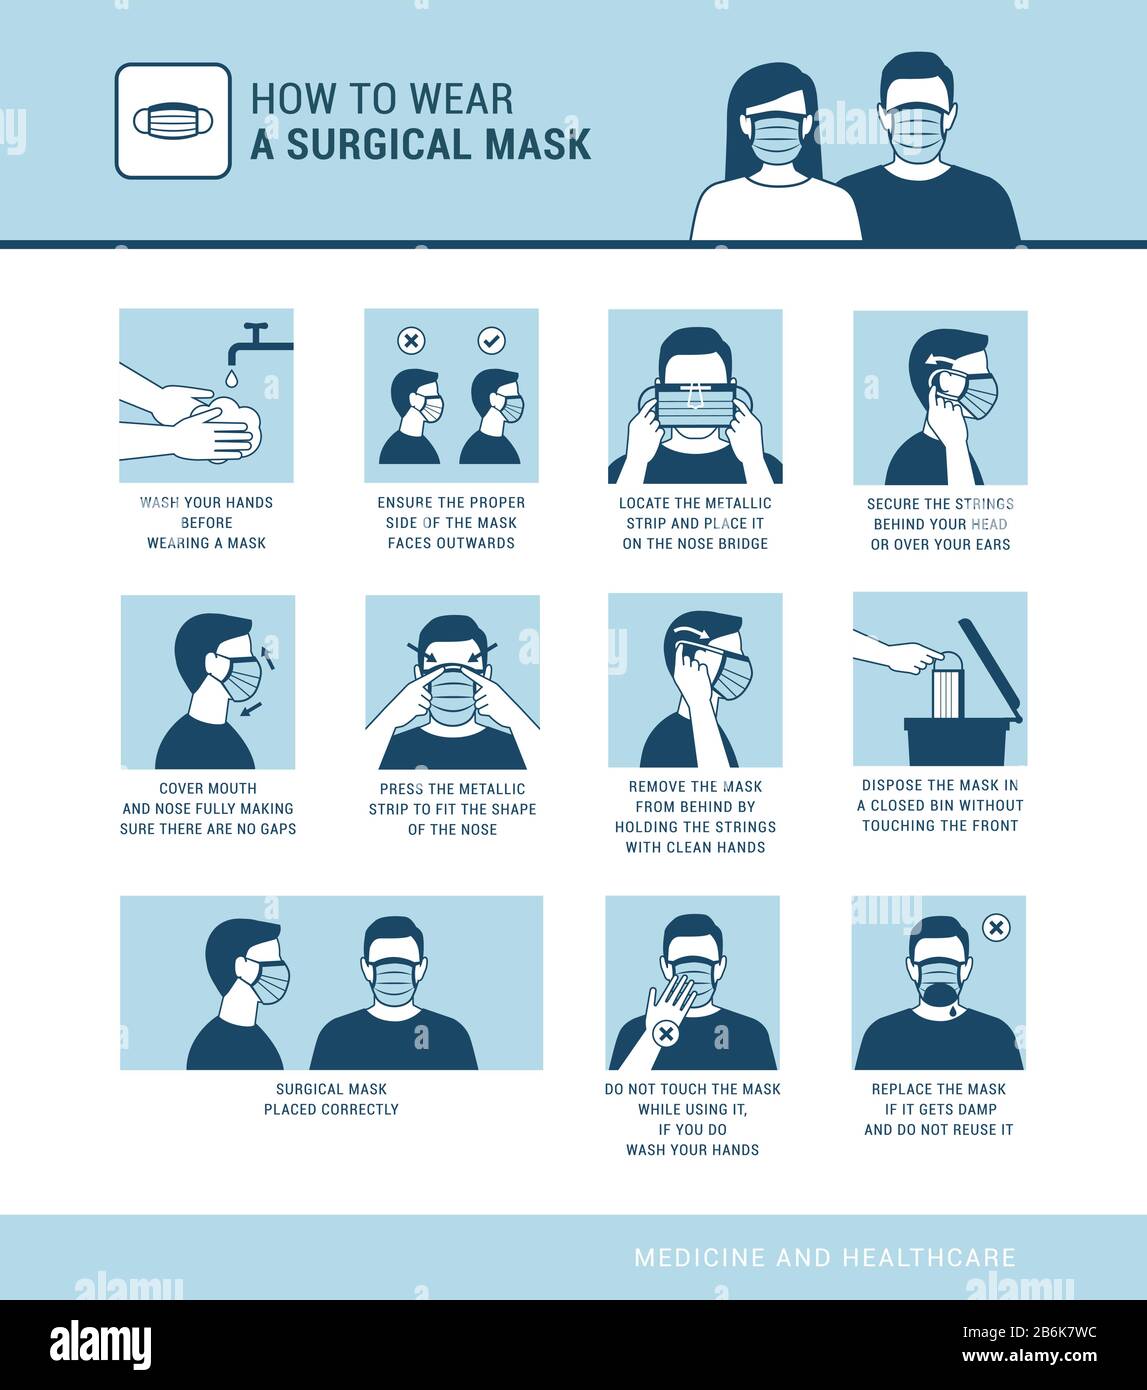 How to wear a surgical mask properly, virus outbreak prevention and pollution protection Stock Vector